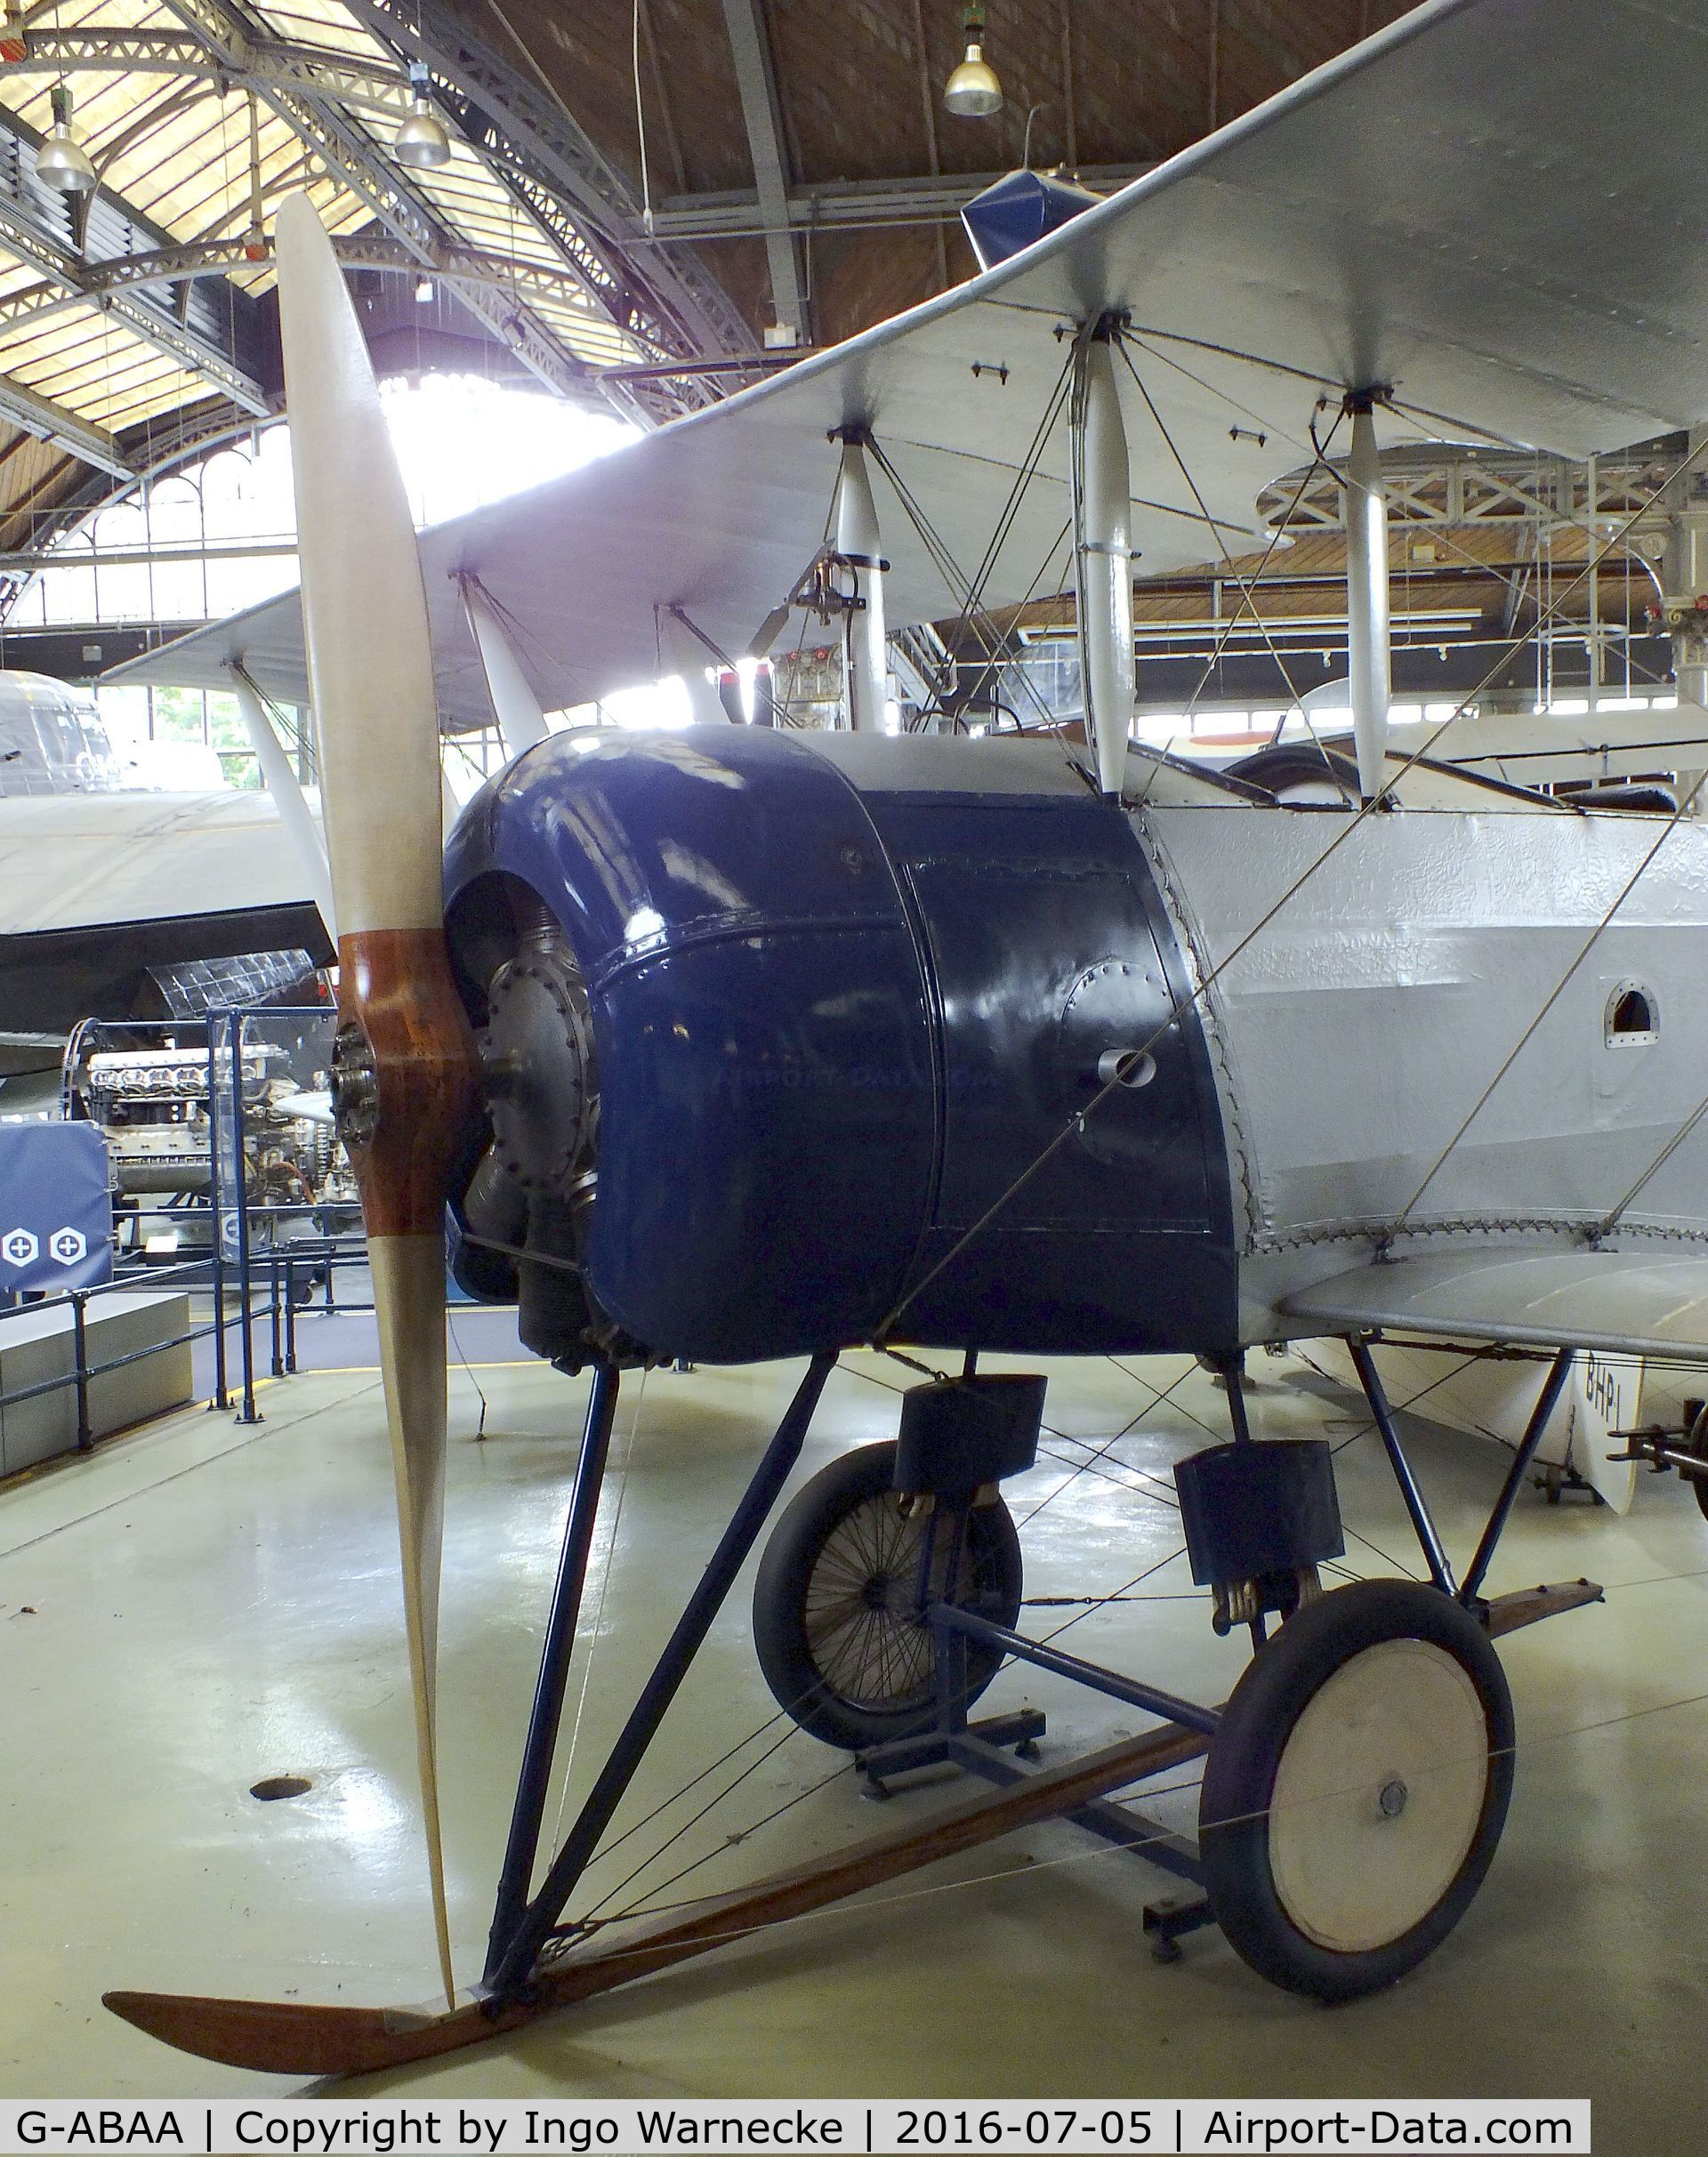 G-ABAA, Avro 504K C/N H2311, Avro 504K at the Museum of Science and Industry, Manchester